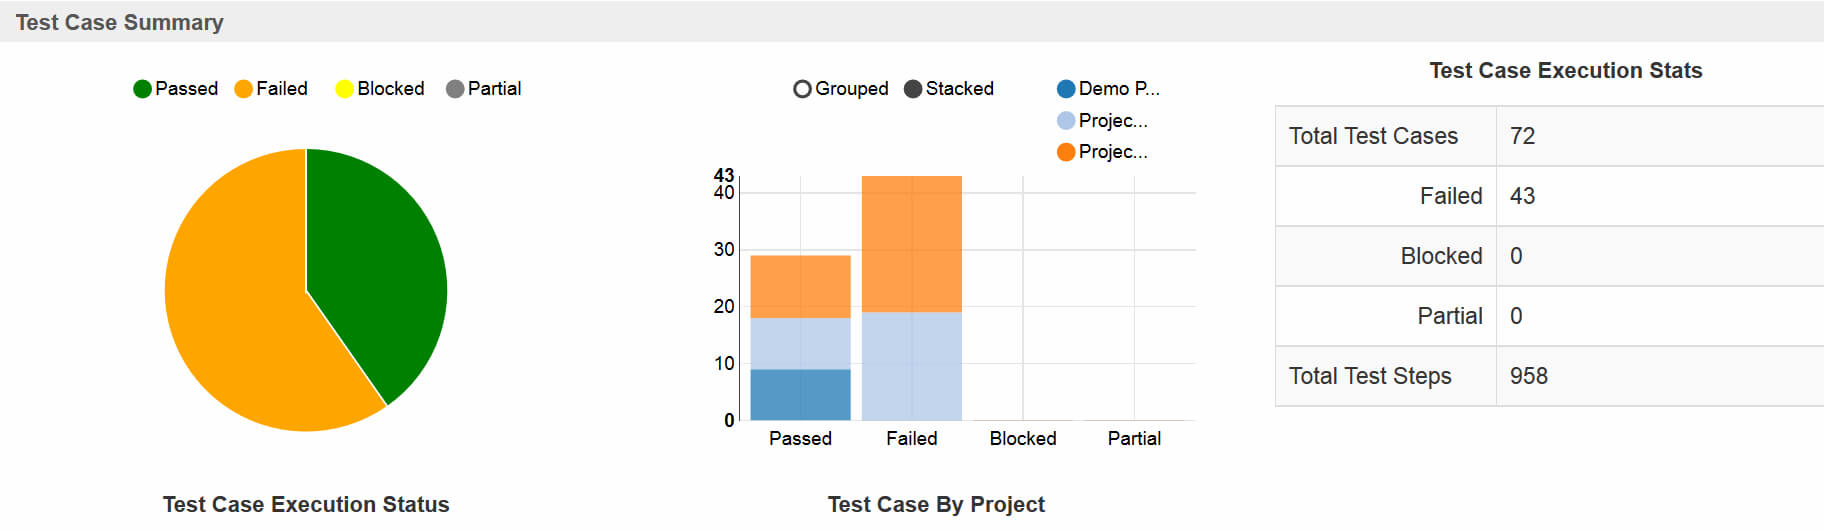 Test Case Execution Report Template ] – Visual Studio 2015 Throughout Test Case Execution Report Template